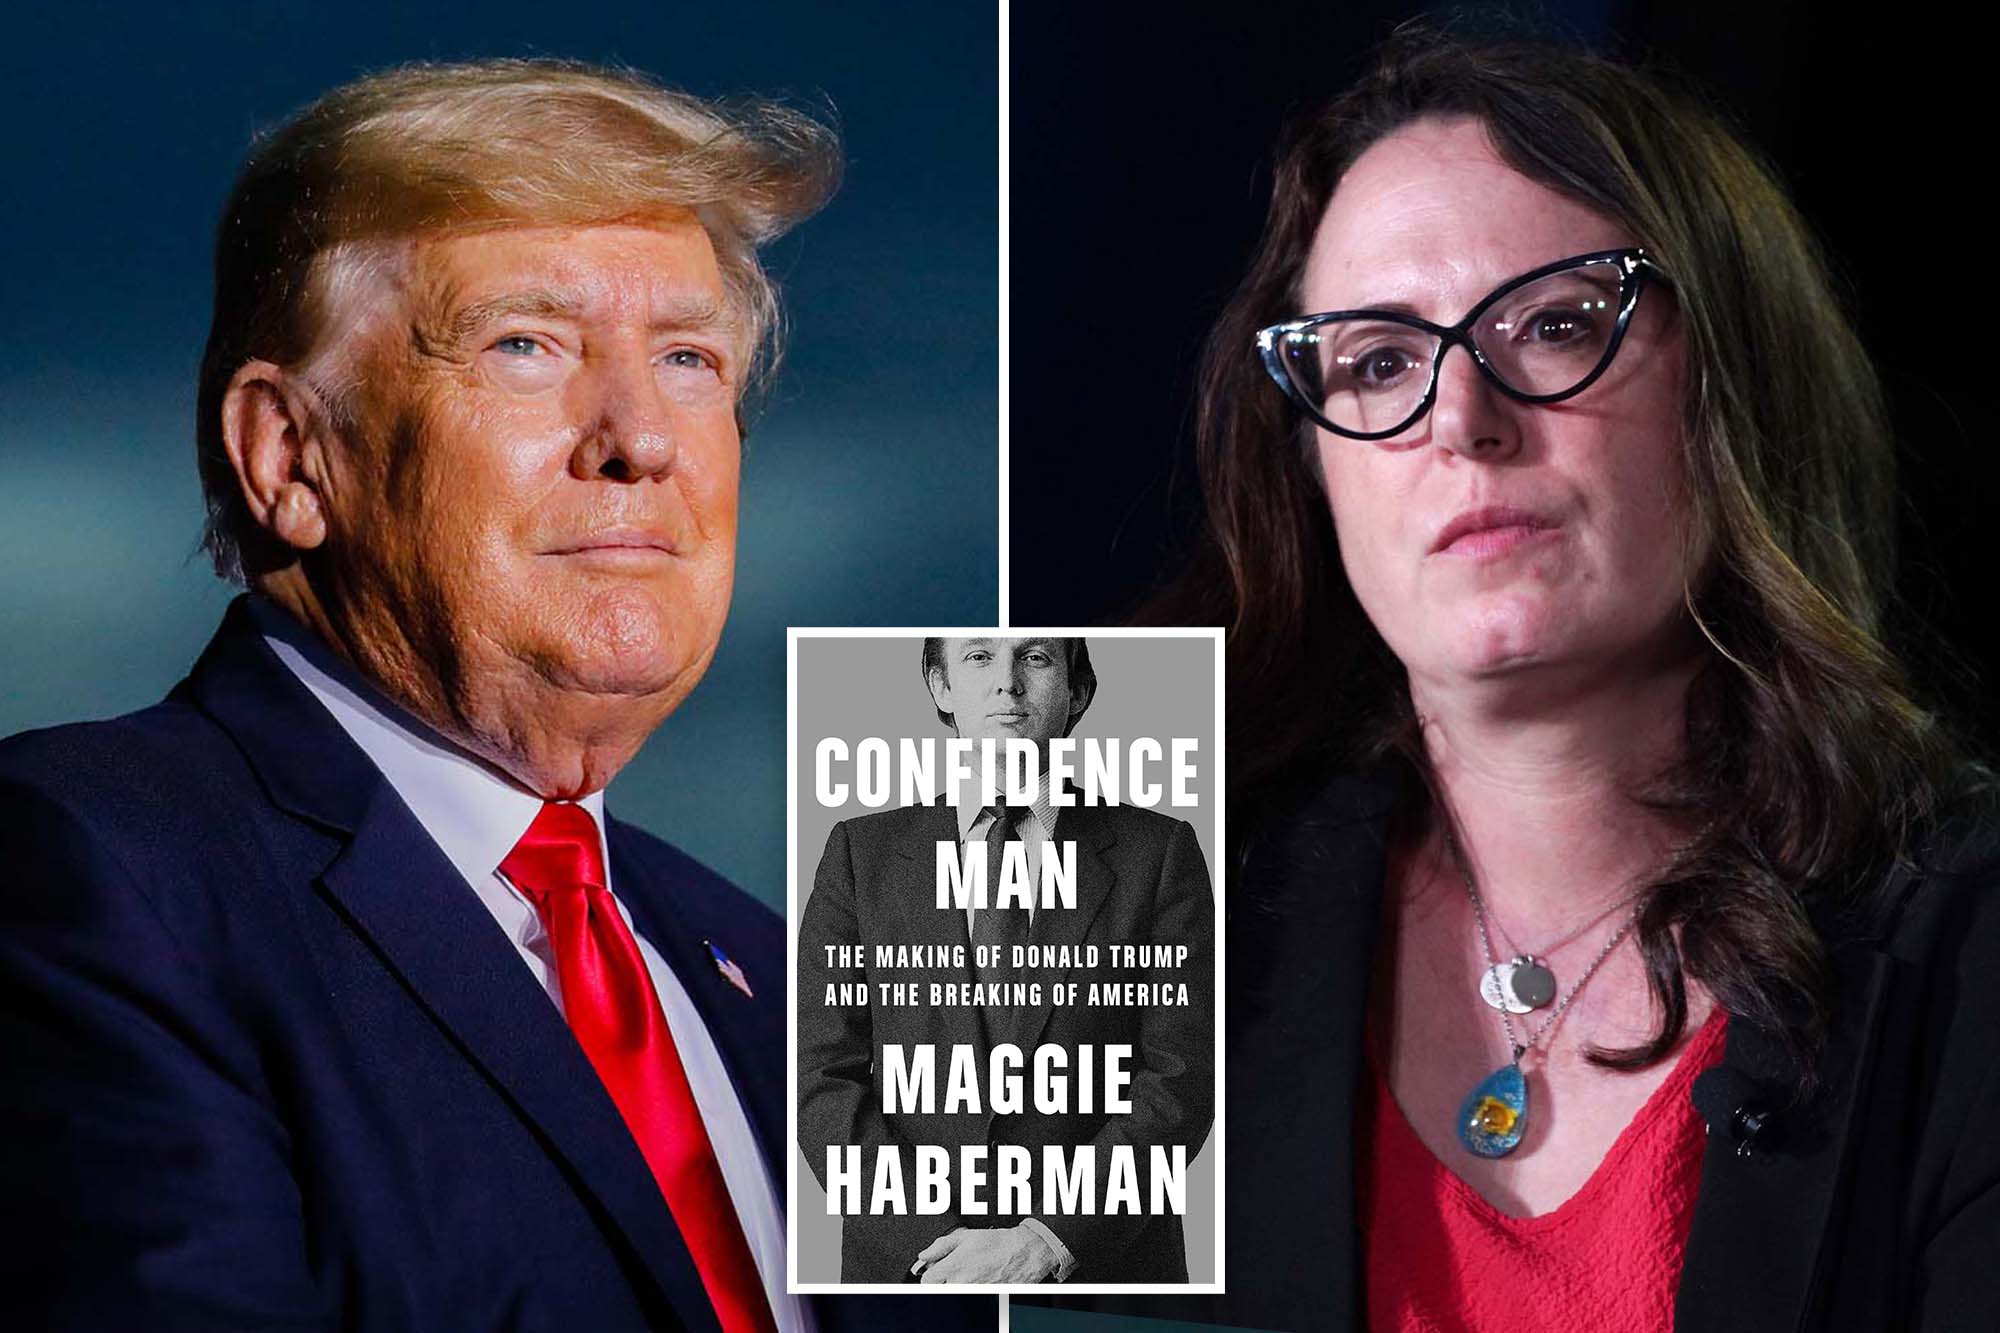 [WATCH/COMMENTARY] Trump Told NYT's Haberman He Took Documents From the White House LAST YEAR